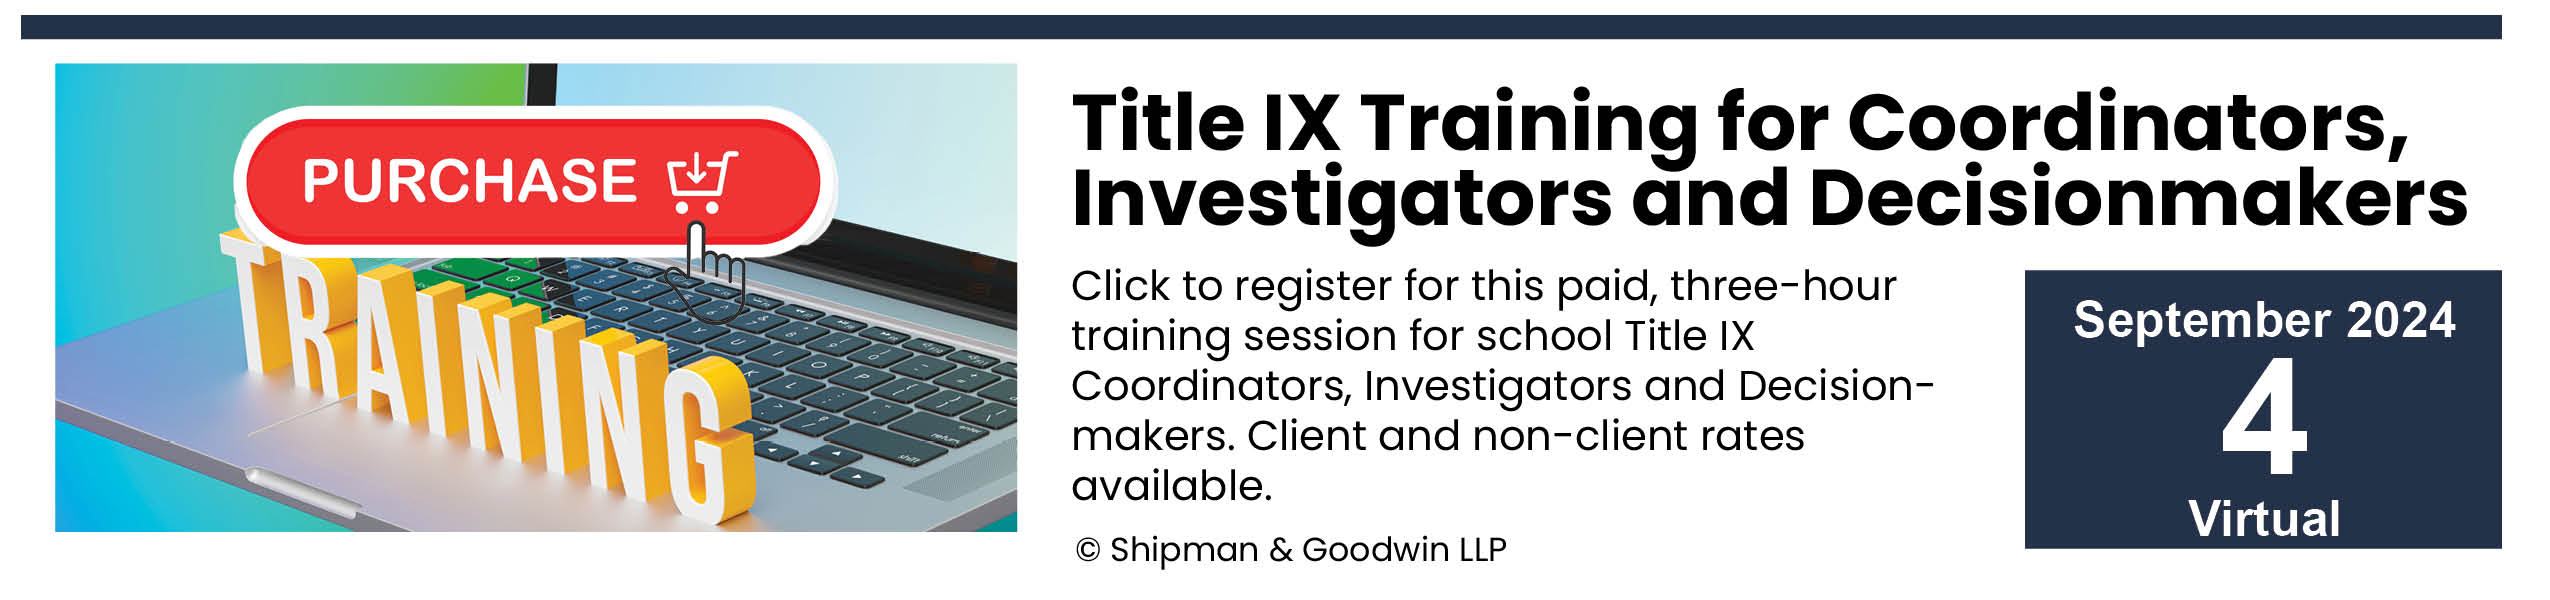 Purchase Title IX Training for Coordinators/Invest/Decisionmakers on September 4, 2024